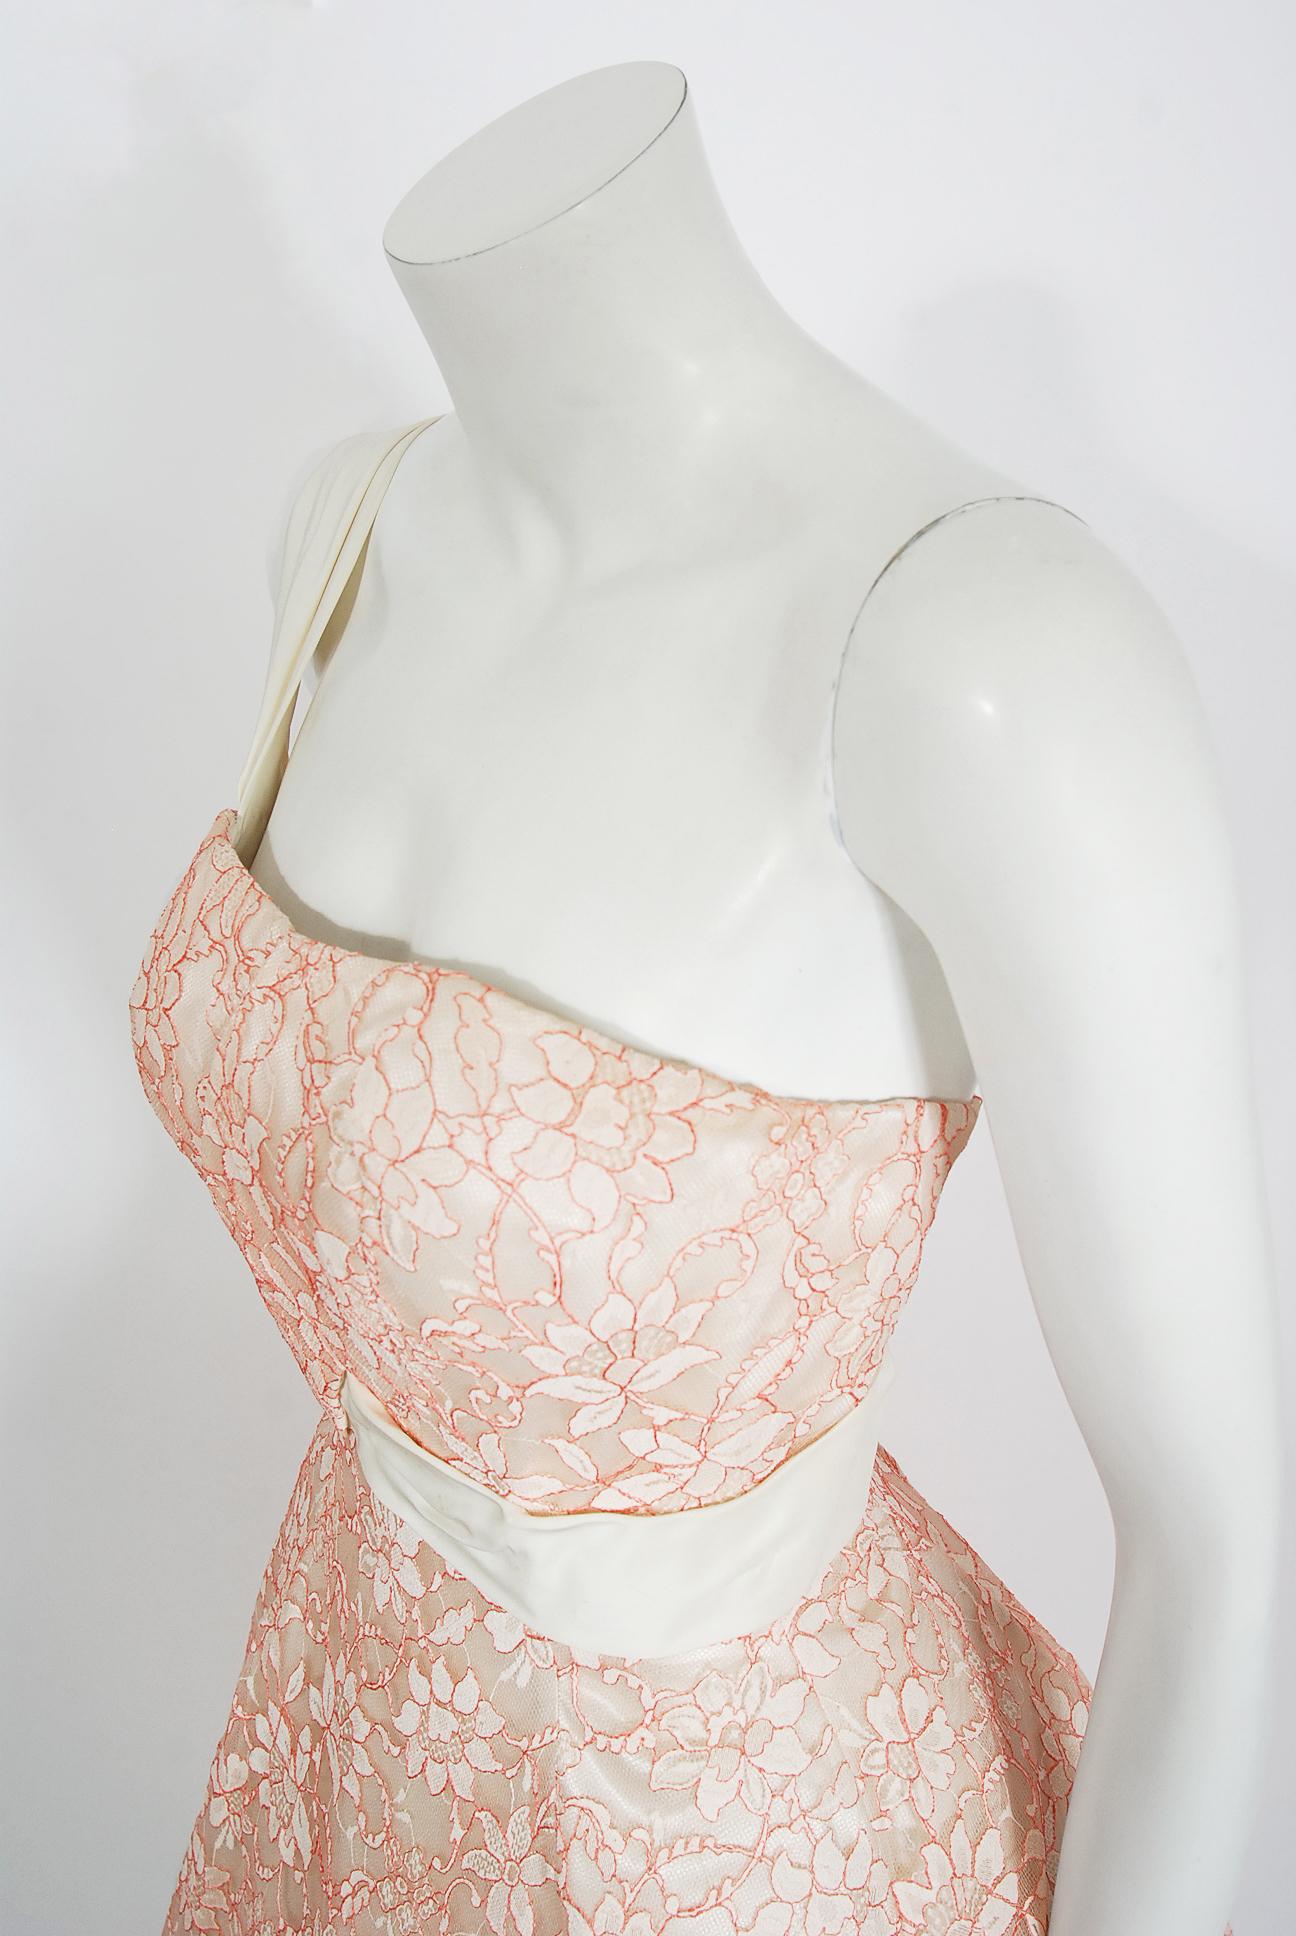 Women's Vintage 1950's Jacques Heim Haute Couture Pink and White Lace One-Shoulder Dress